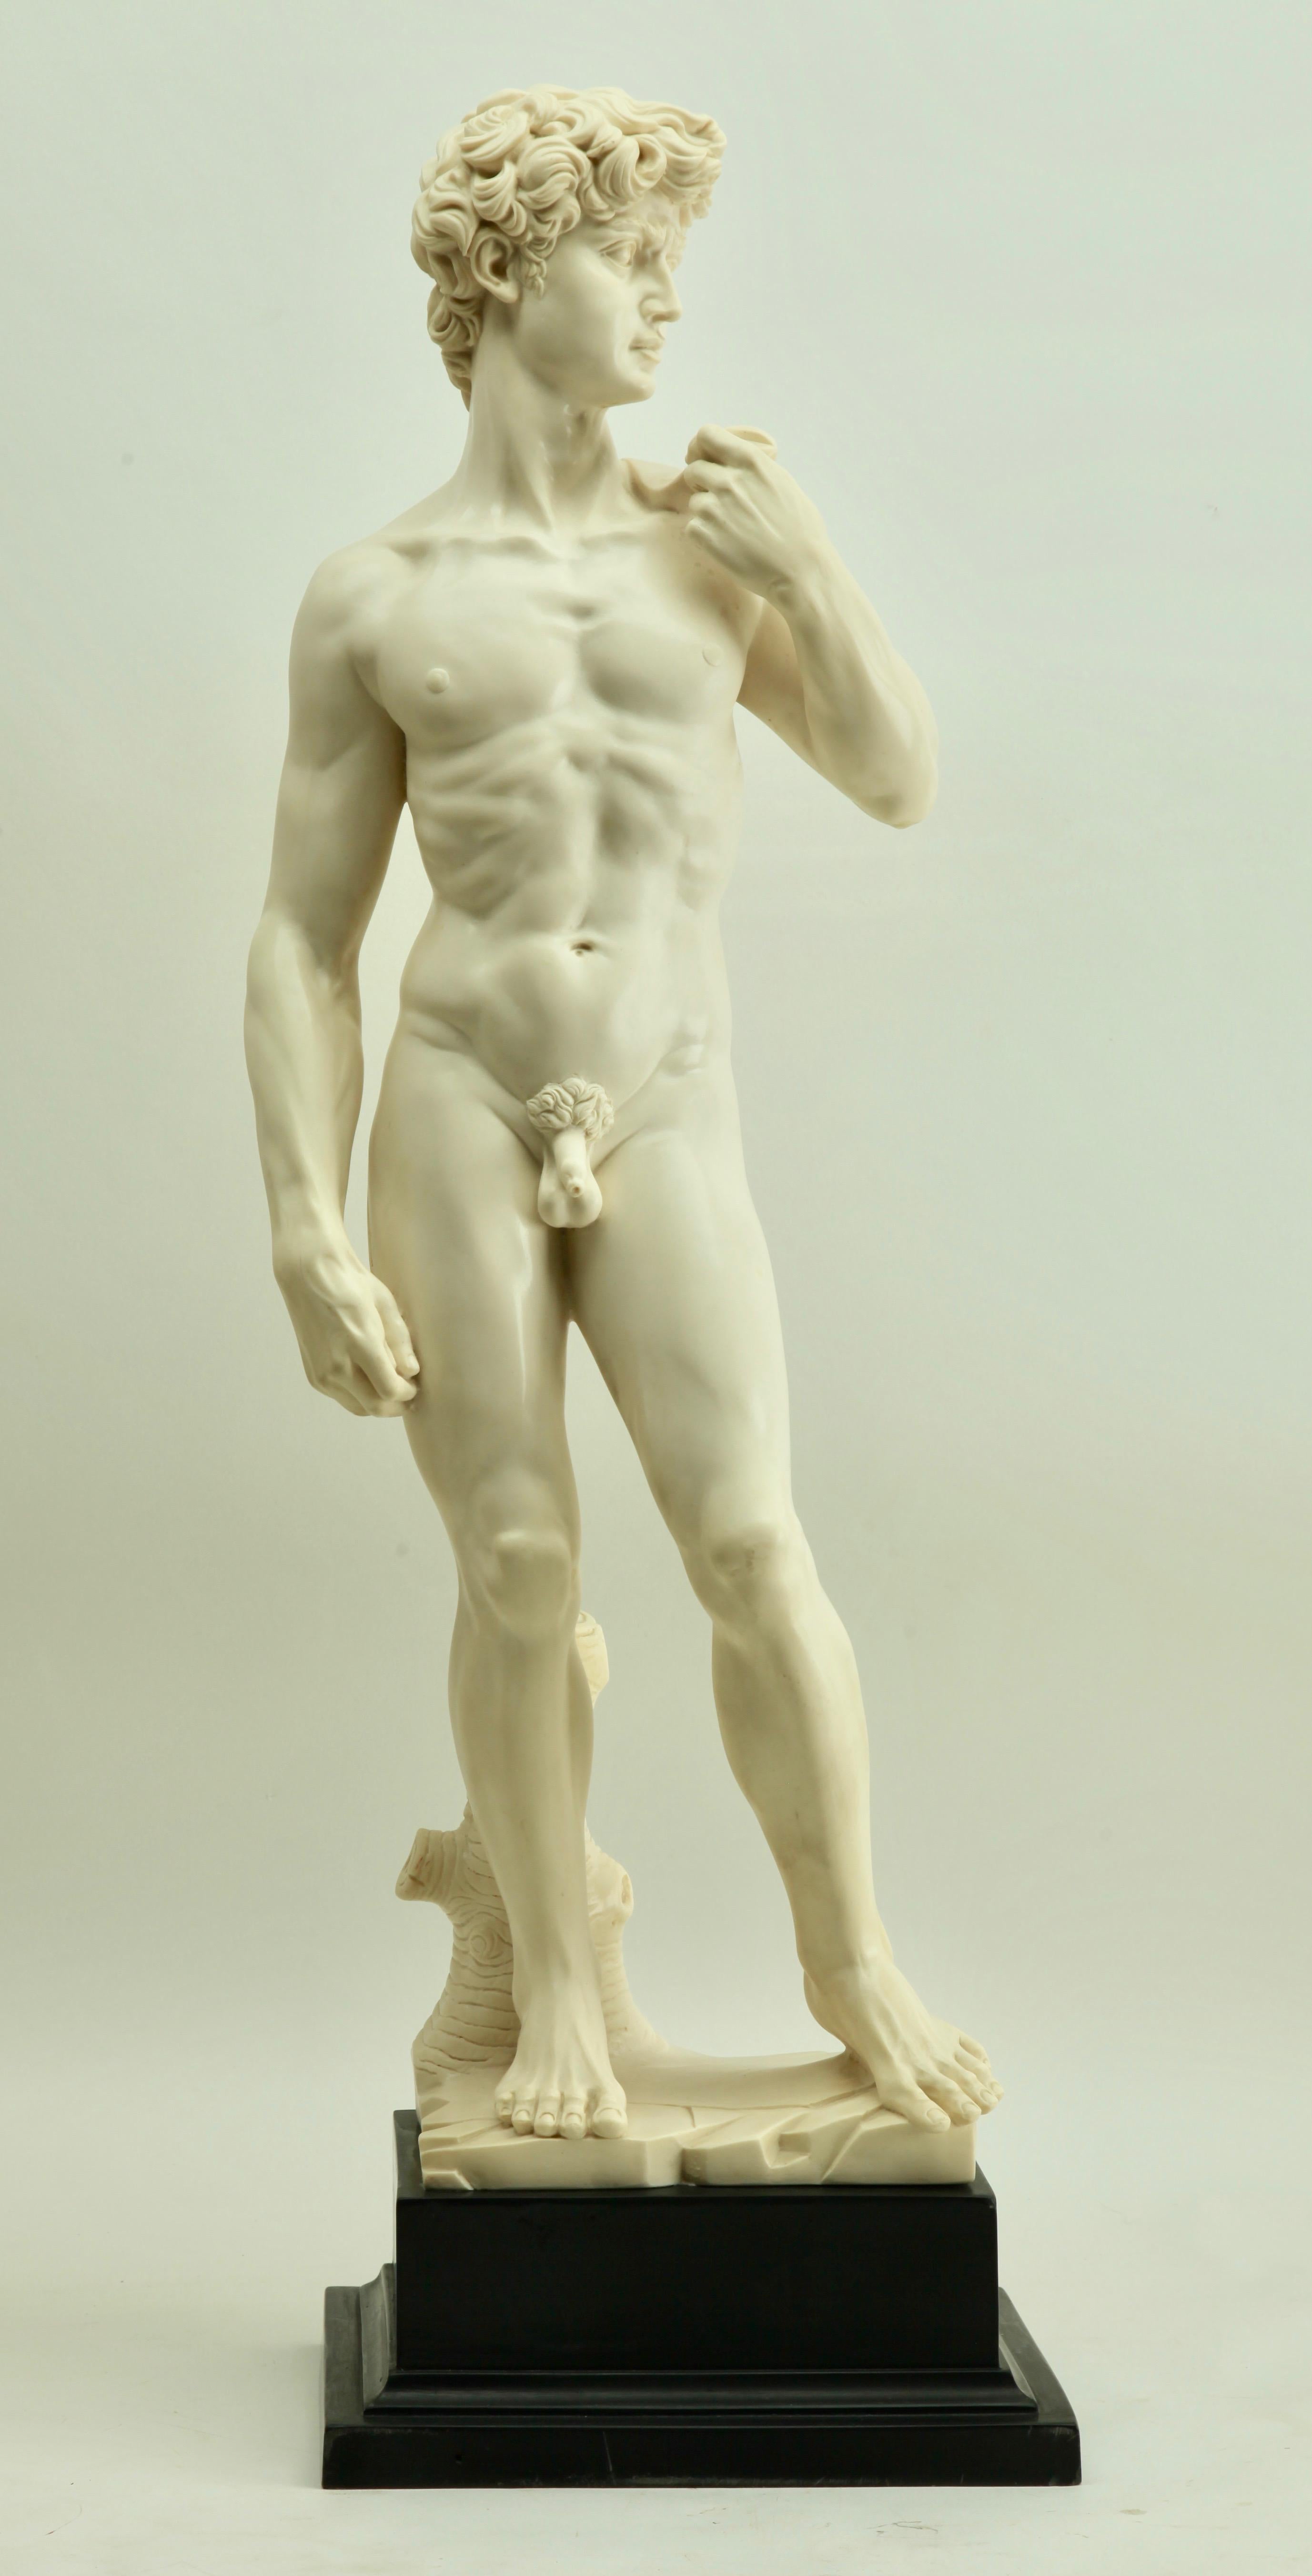 Mid-Century Modern Detailed and Stylized Roman Statue of the 'David' Sculpted by G Ruggeri